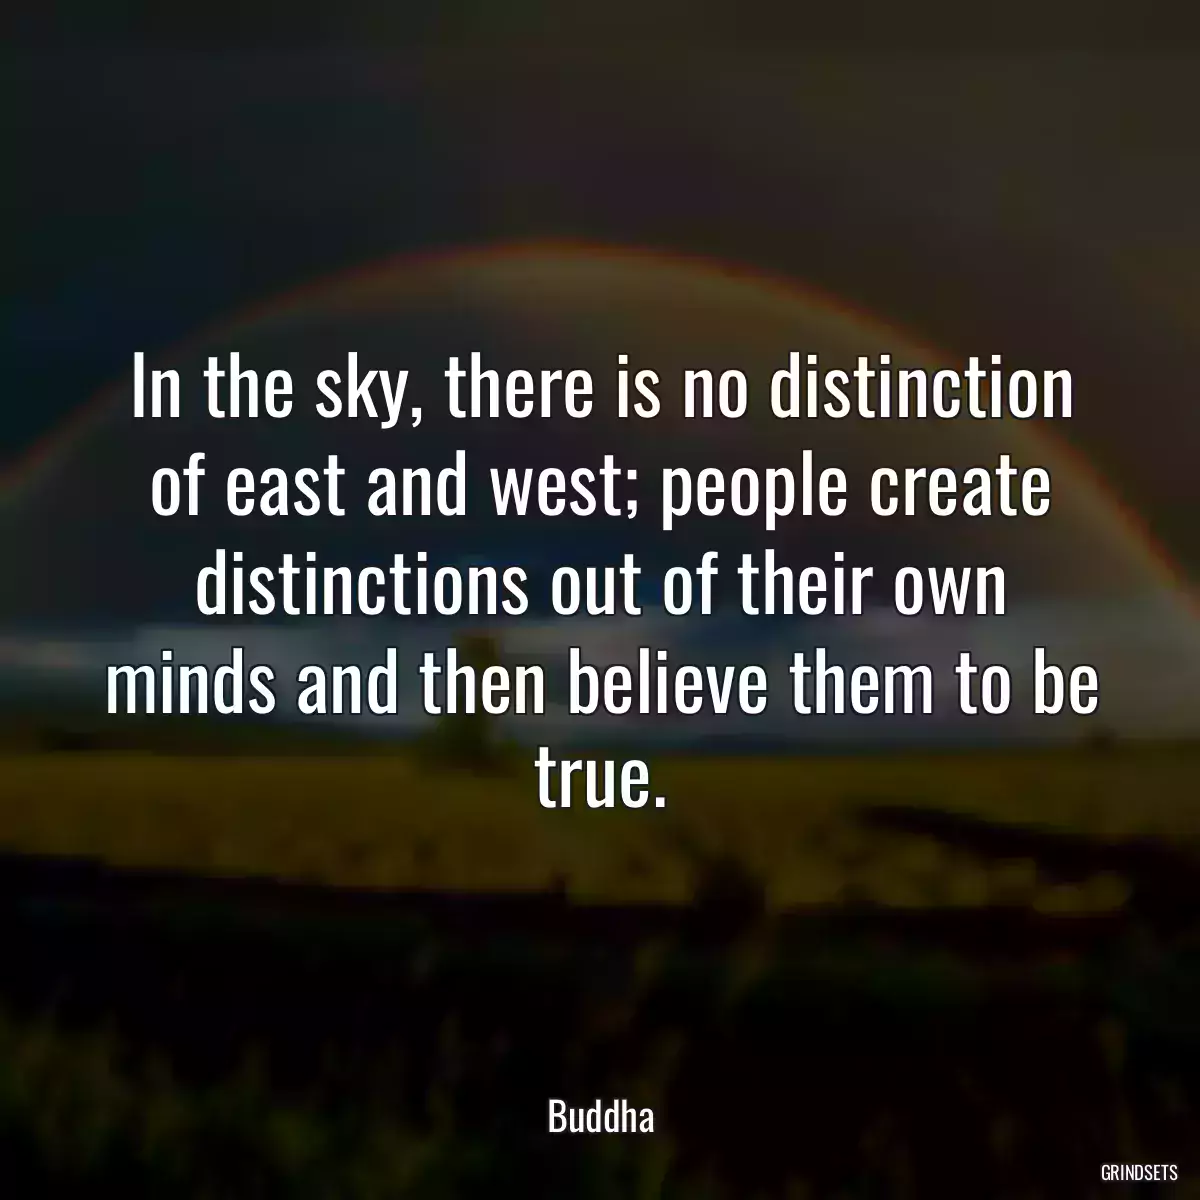 In the sky, there is no distinction of east and west; people create distinctions out of their own minds and then believe them to be true.